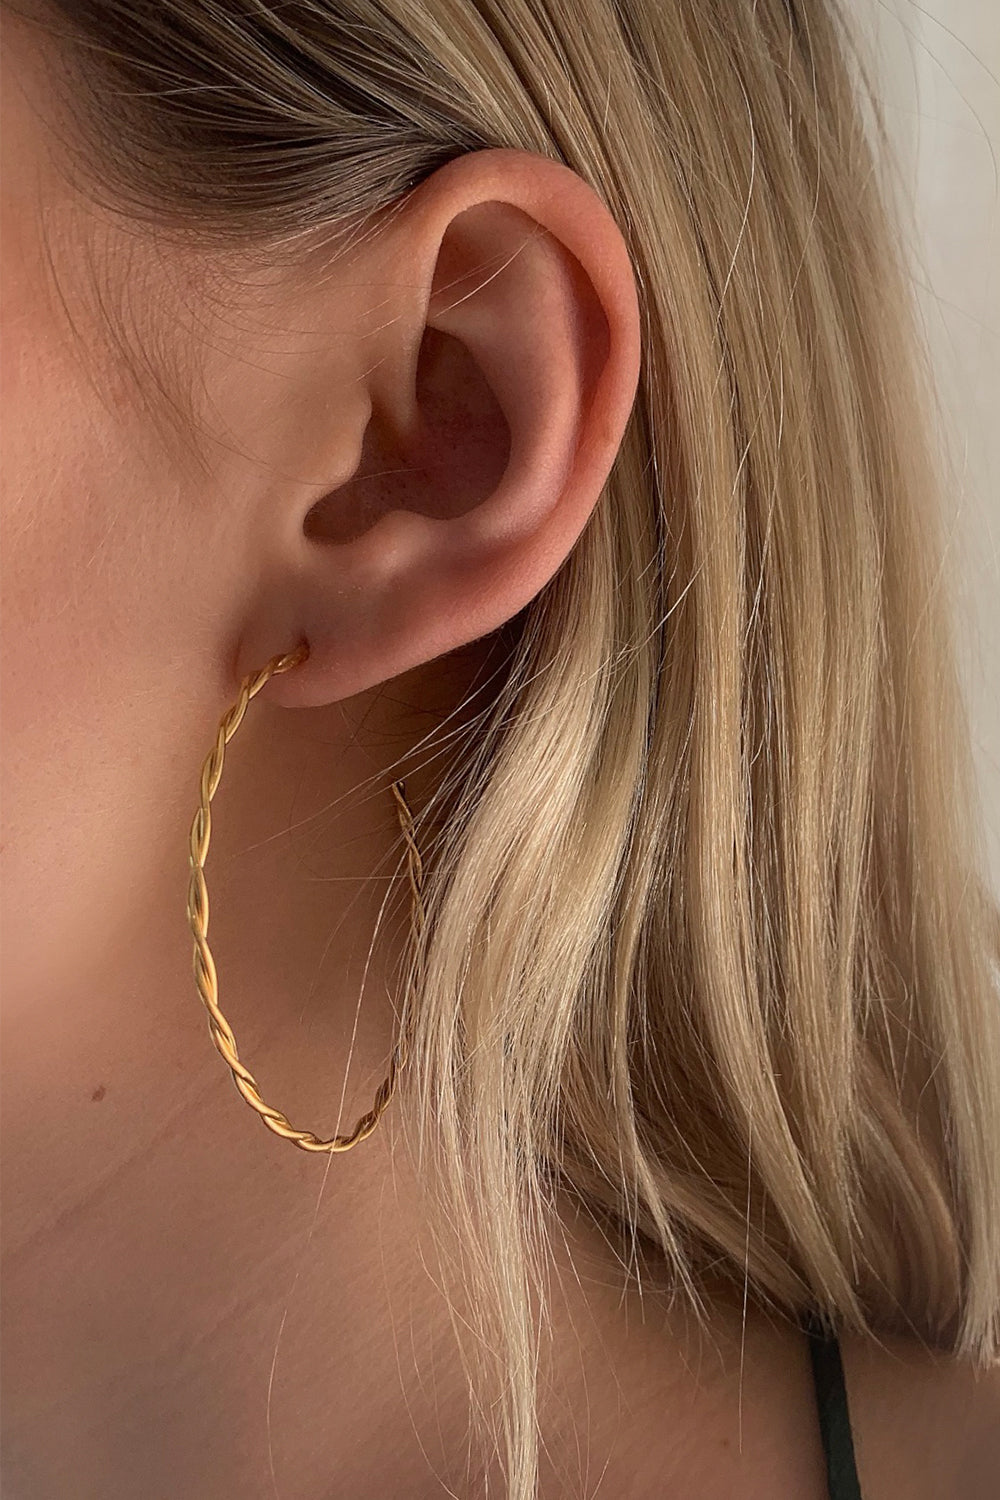 Buy Set of 3 Gold Cartilage Hoops, Curated Ear Piercing, 14K Gold Helix  Earrings, Gold Daith Hoop, Gold Tragus Hoop Set Options Available Online in  India - Etsy